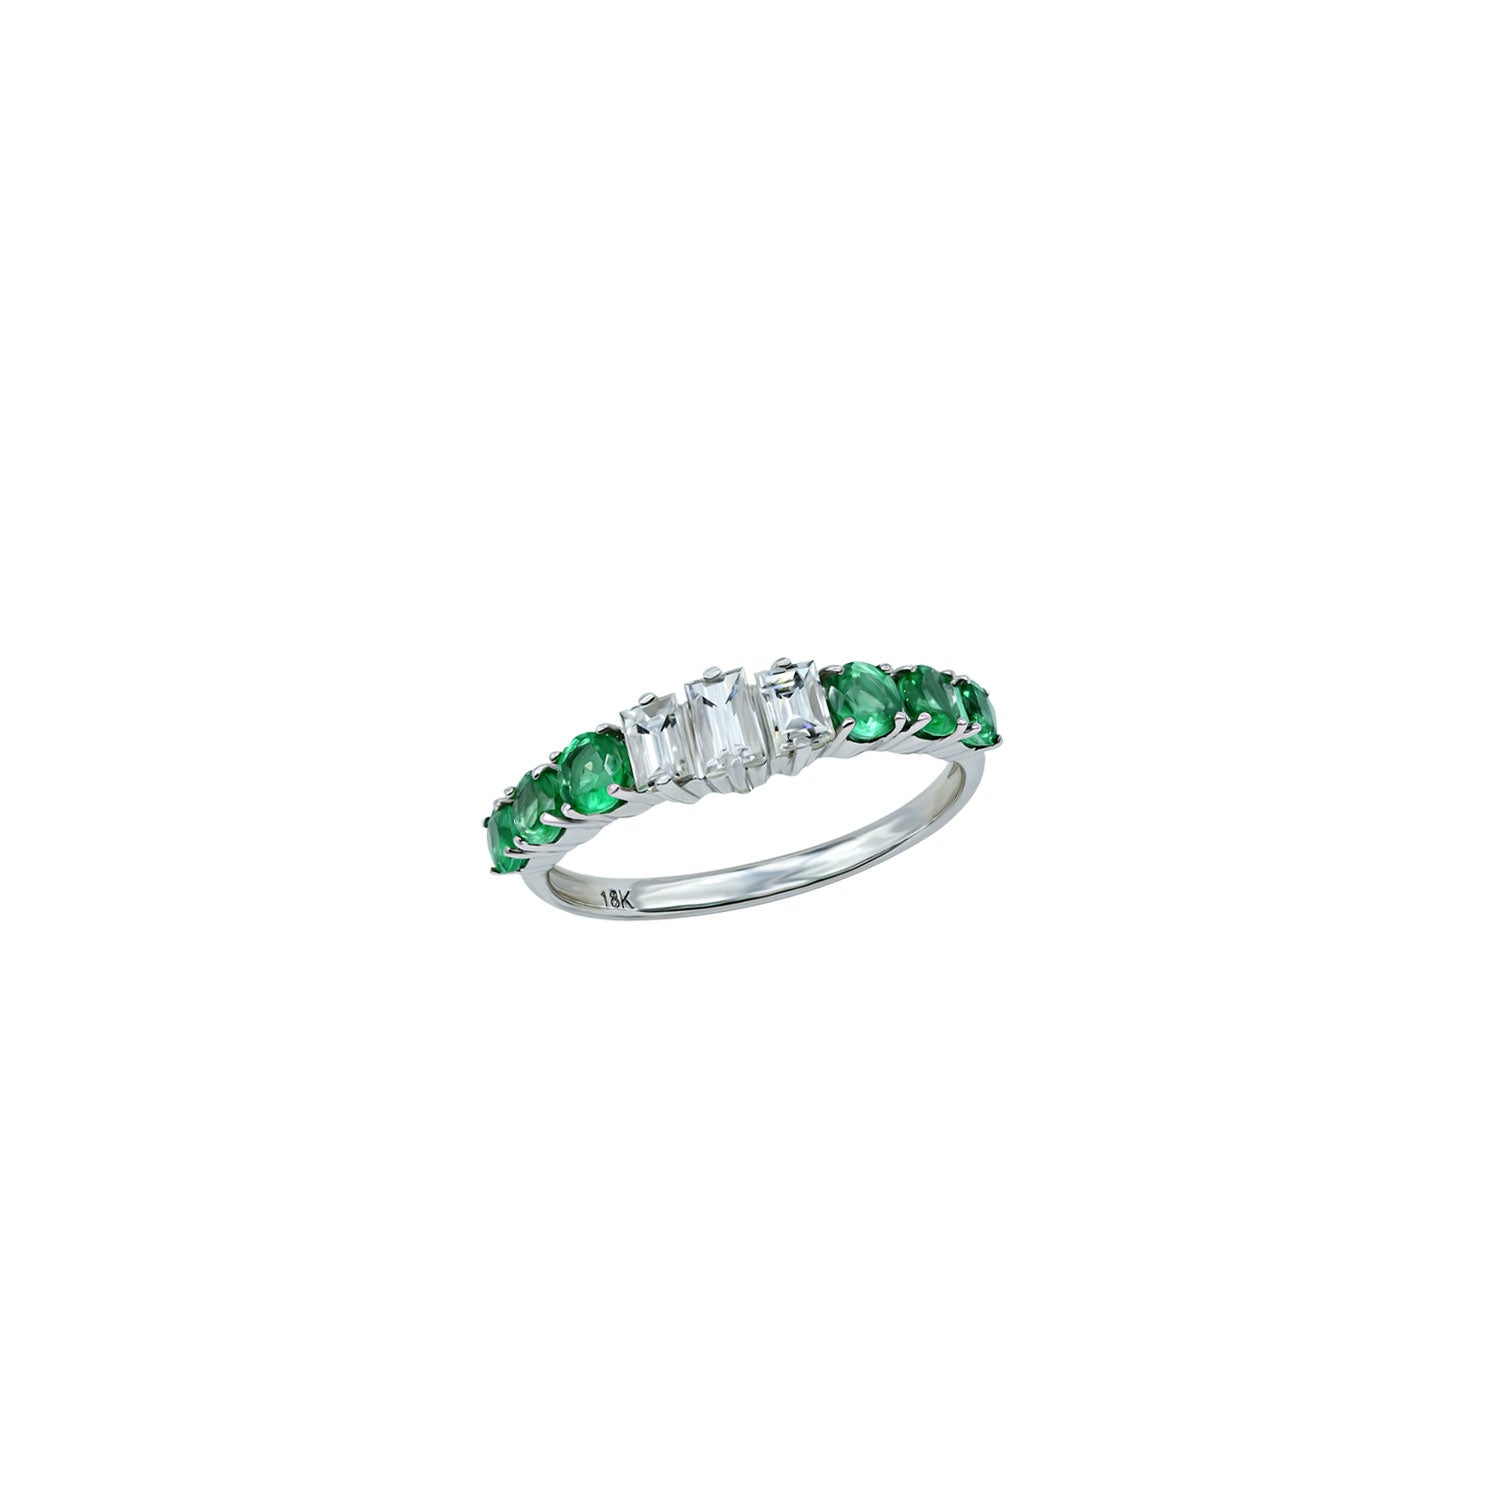 Emerald with diamond is the perfect combination.